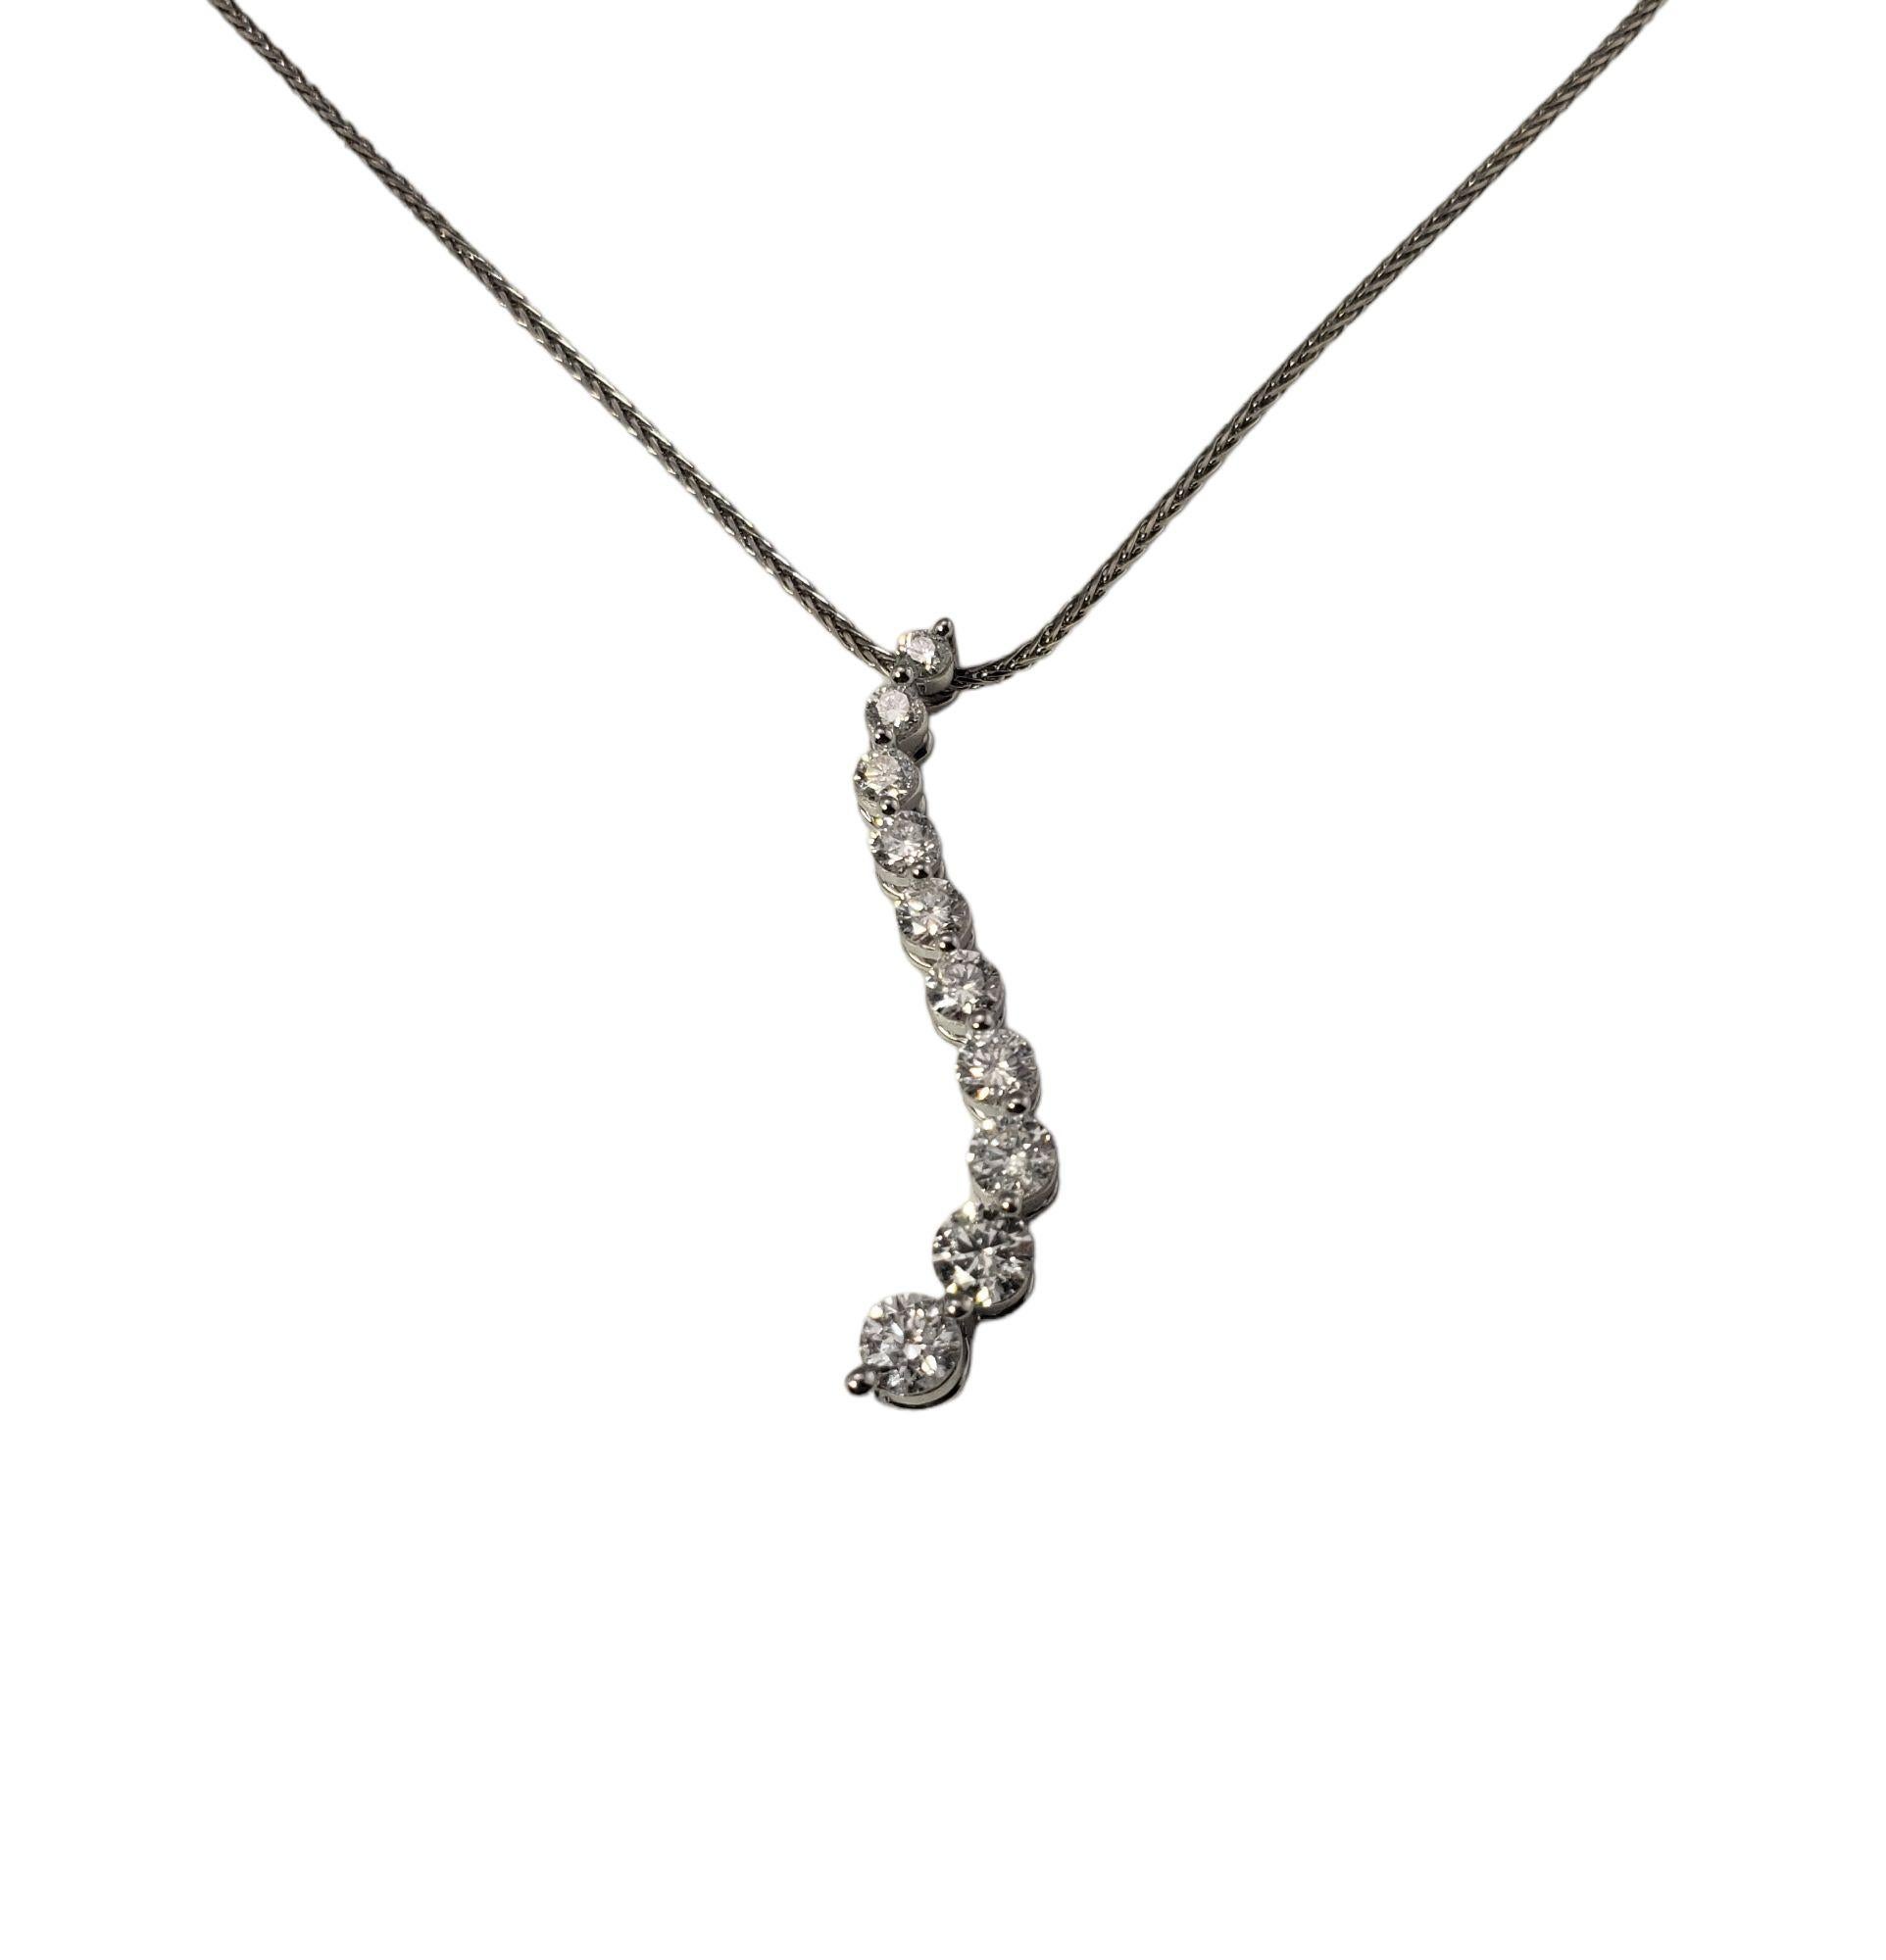 14 Karat White Gold Diamond Pendant Necklace In Good Condition For Sale In Washington Depot, CT